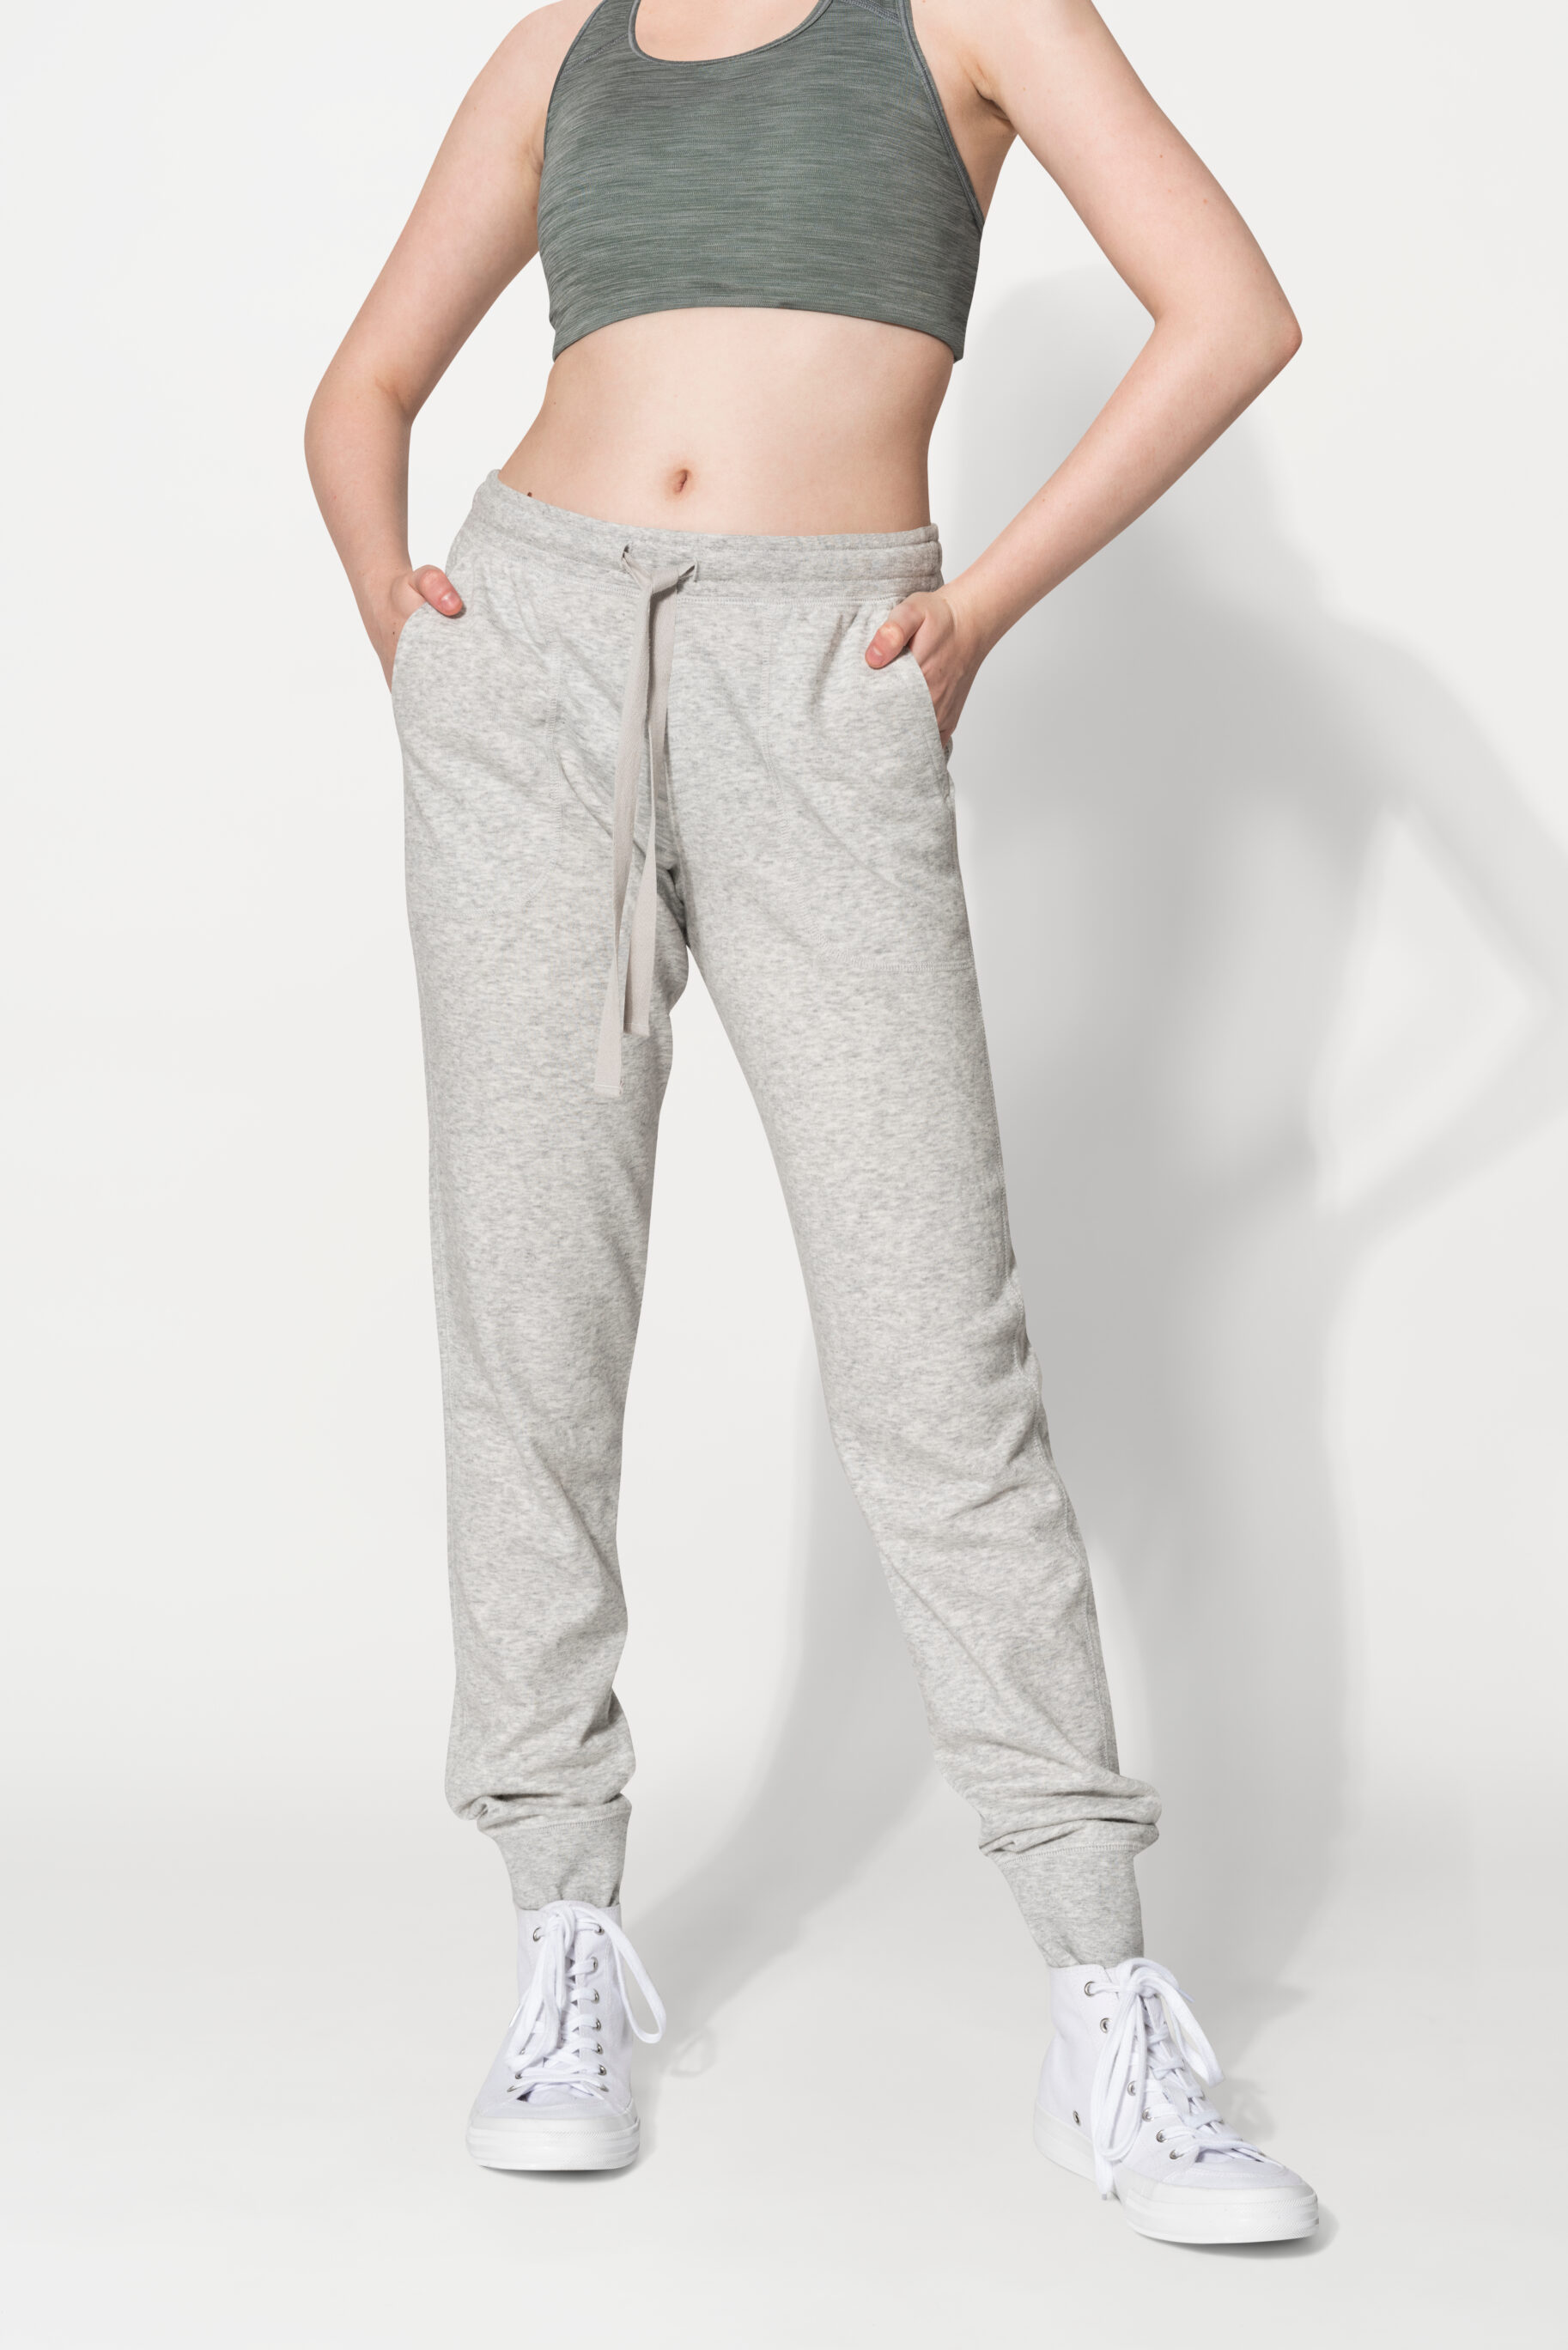 Crop Top With Gray Sweatpants For Women